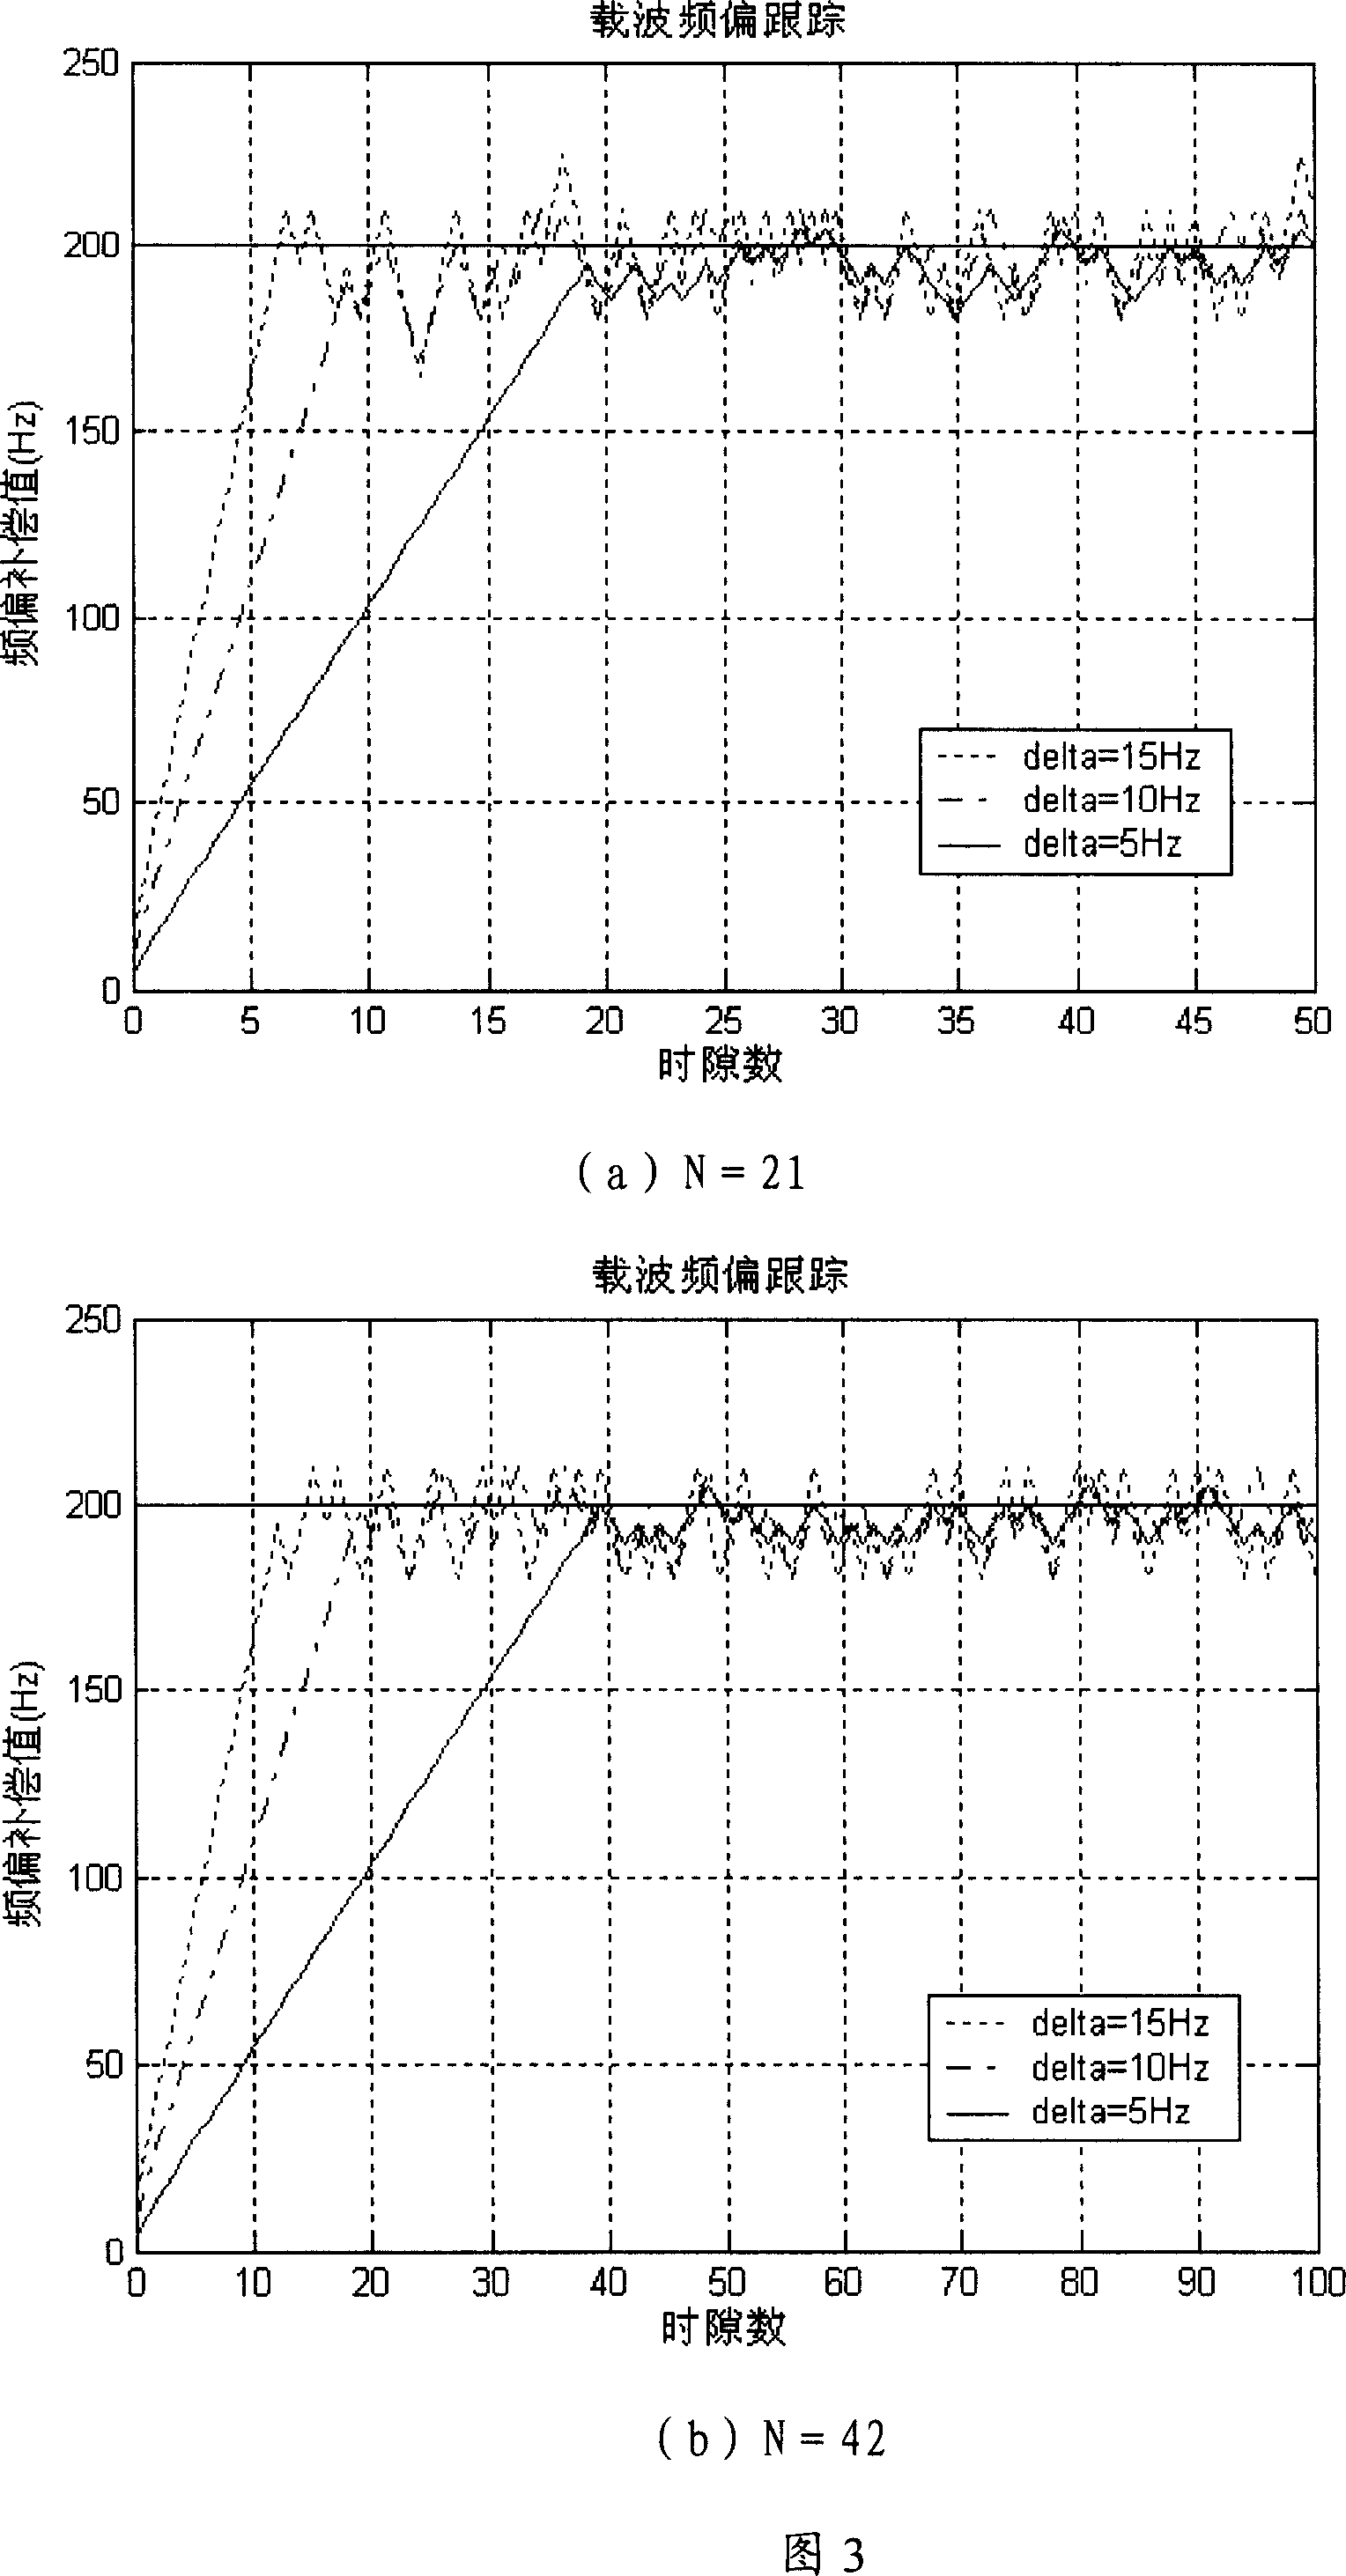 A carrier residual frequency deviation tracking method based on OFDM system